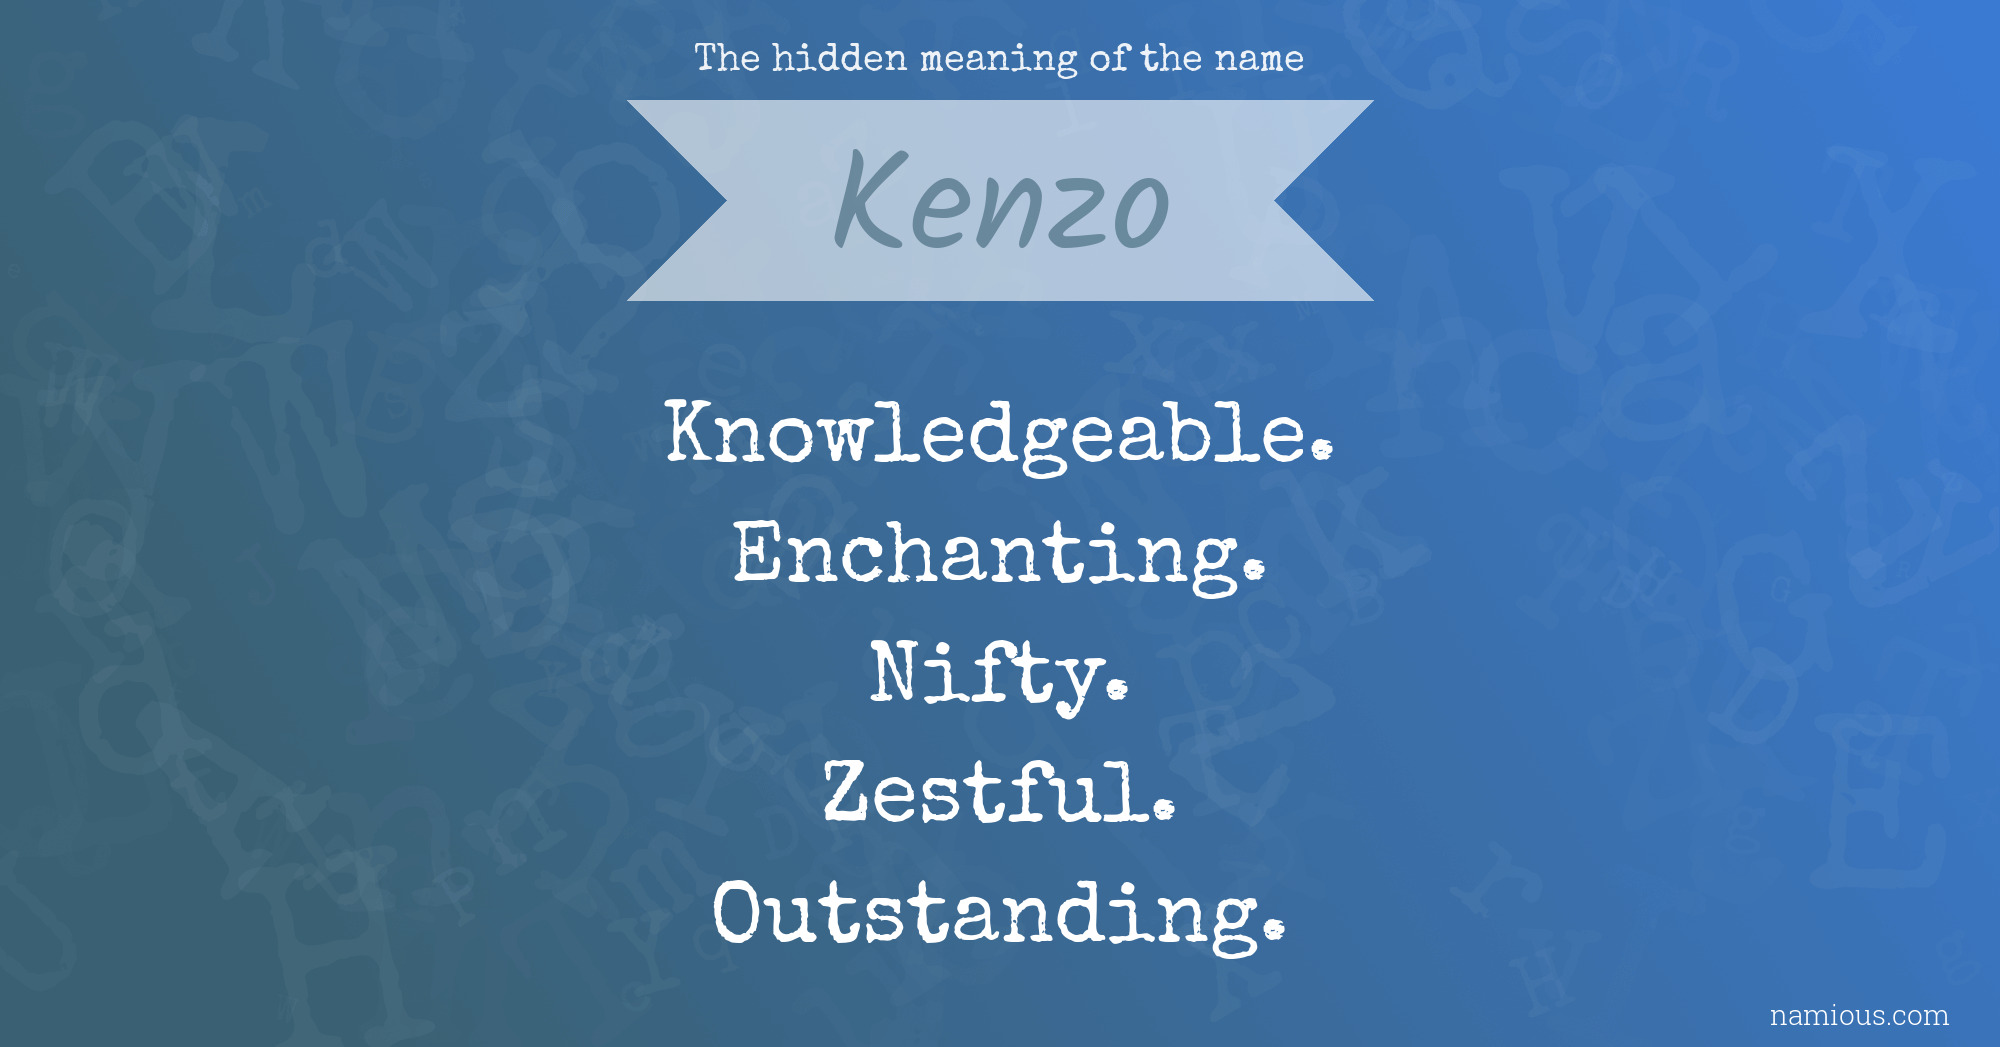 kenzo meaning in english